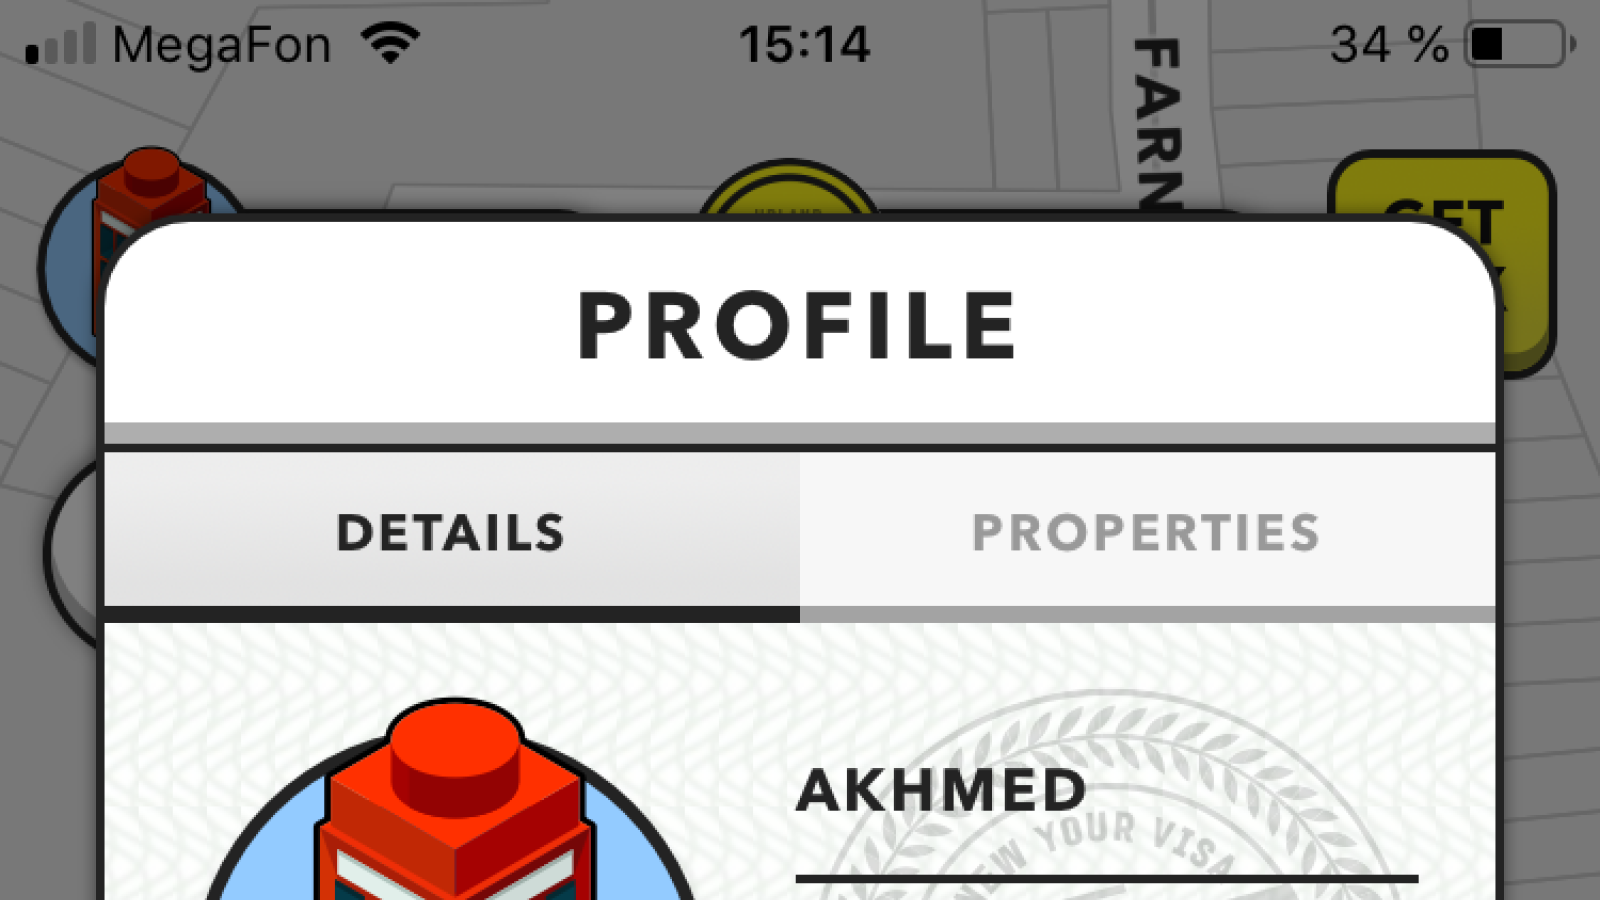 Here is how the newbie profile looks. To browse through the objects available for sale, the gamers need to choose the Block Explorer symbol (e.g. red cabin)